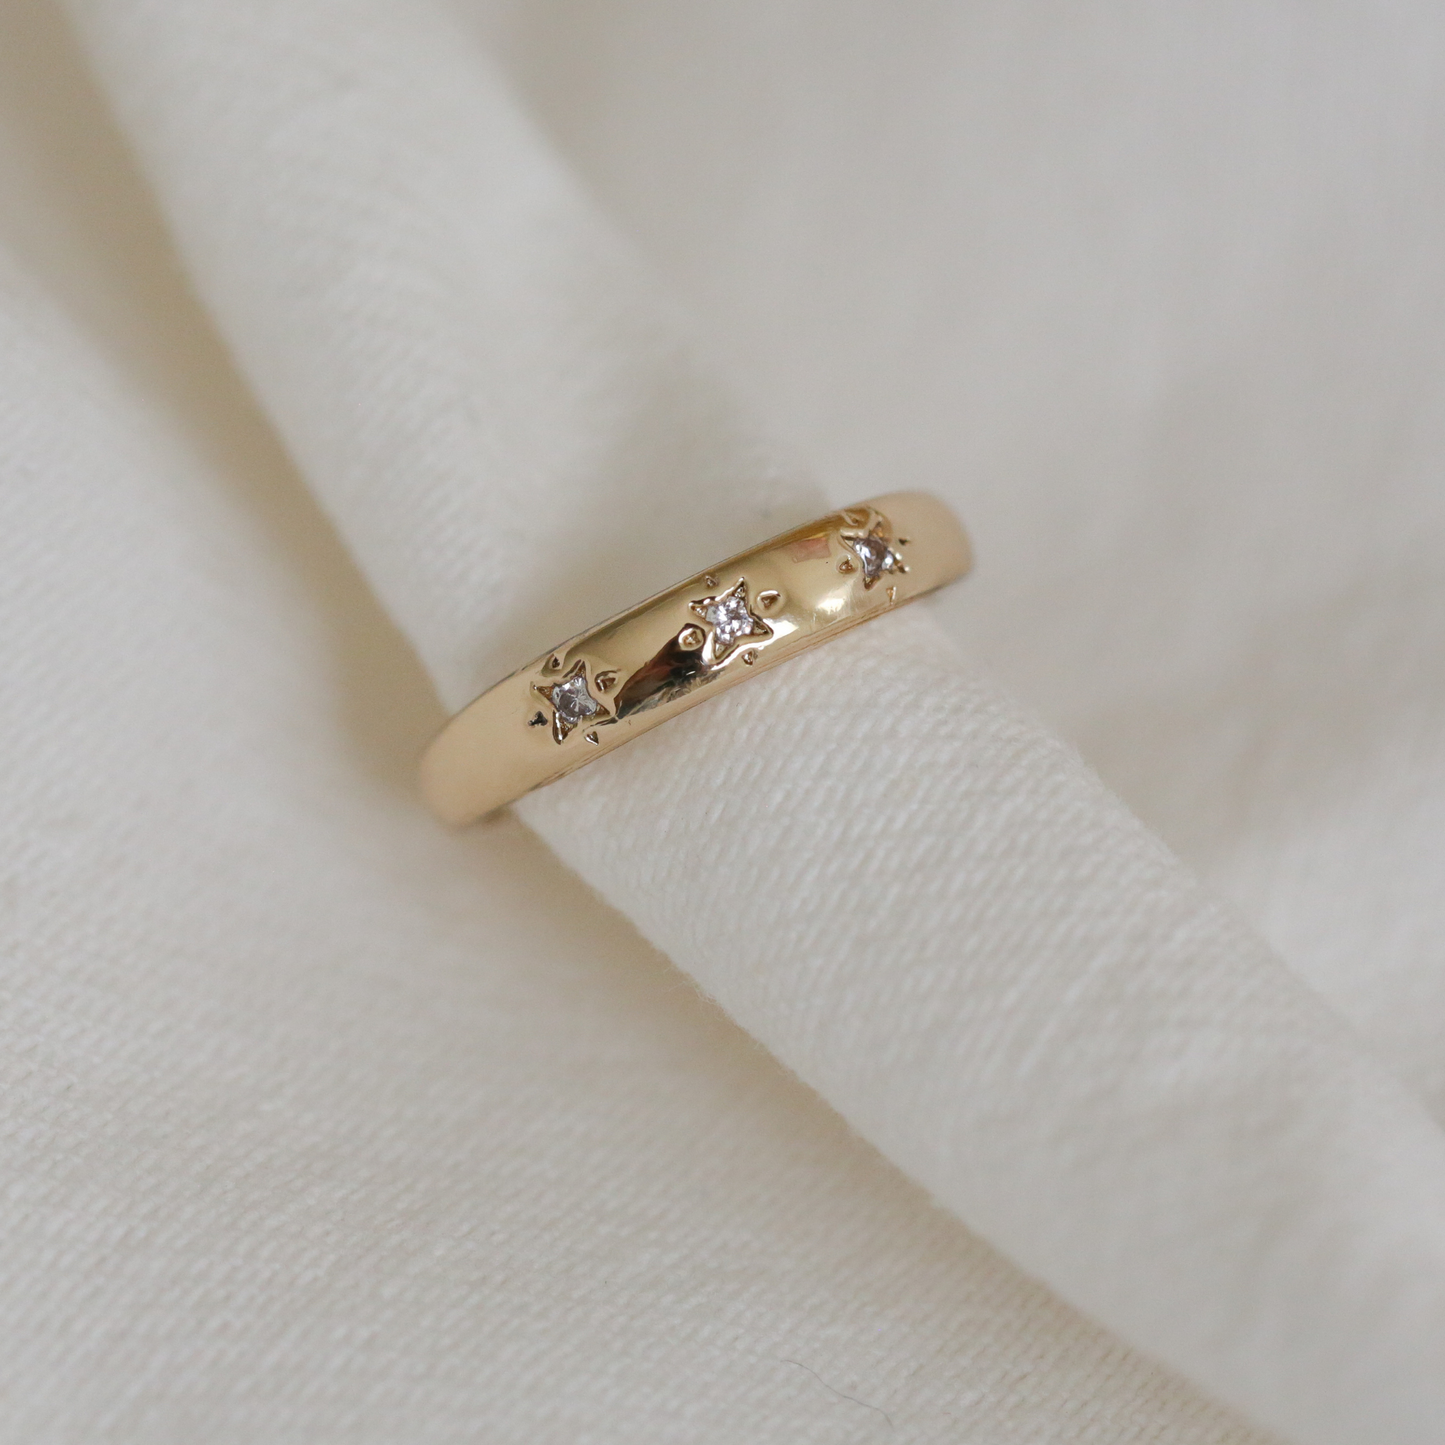 Celestial Ring Band Adjustable, Brass Gold Dipped Ring, Cubic Zirconia Star Ring